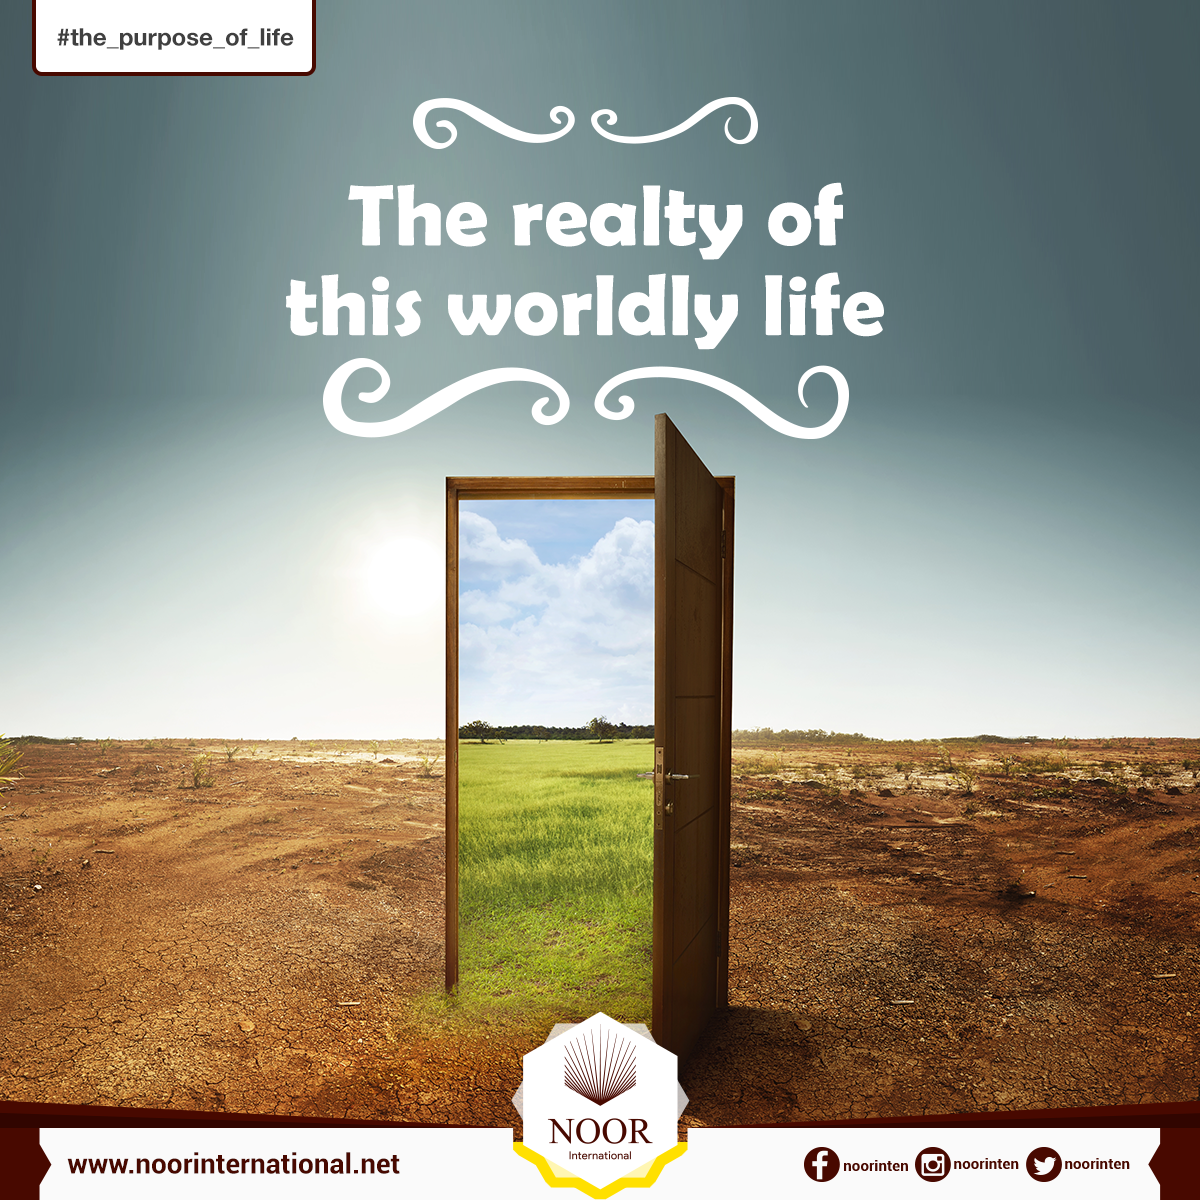 The realty of this worldly life